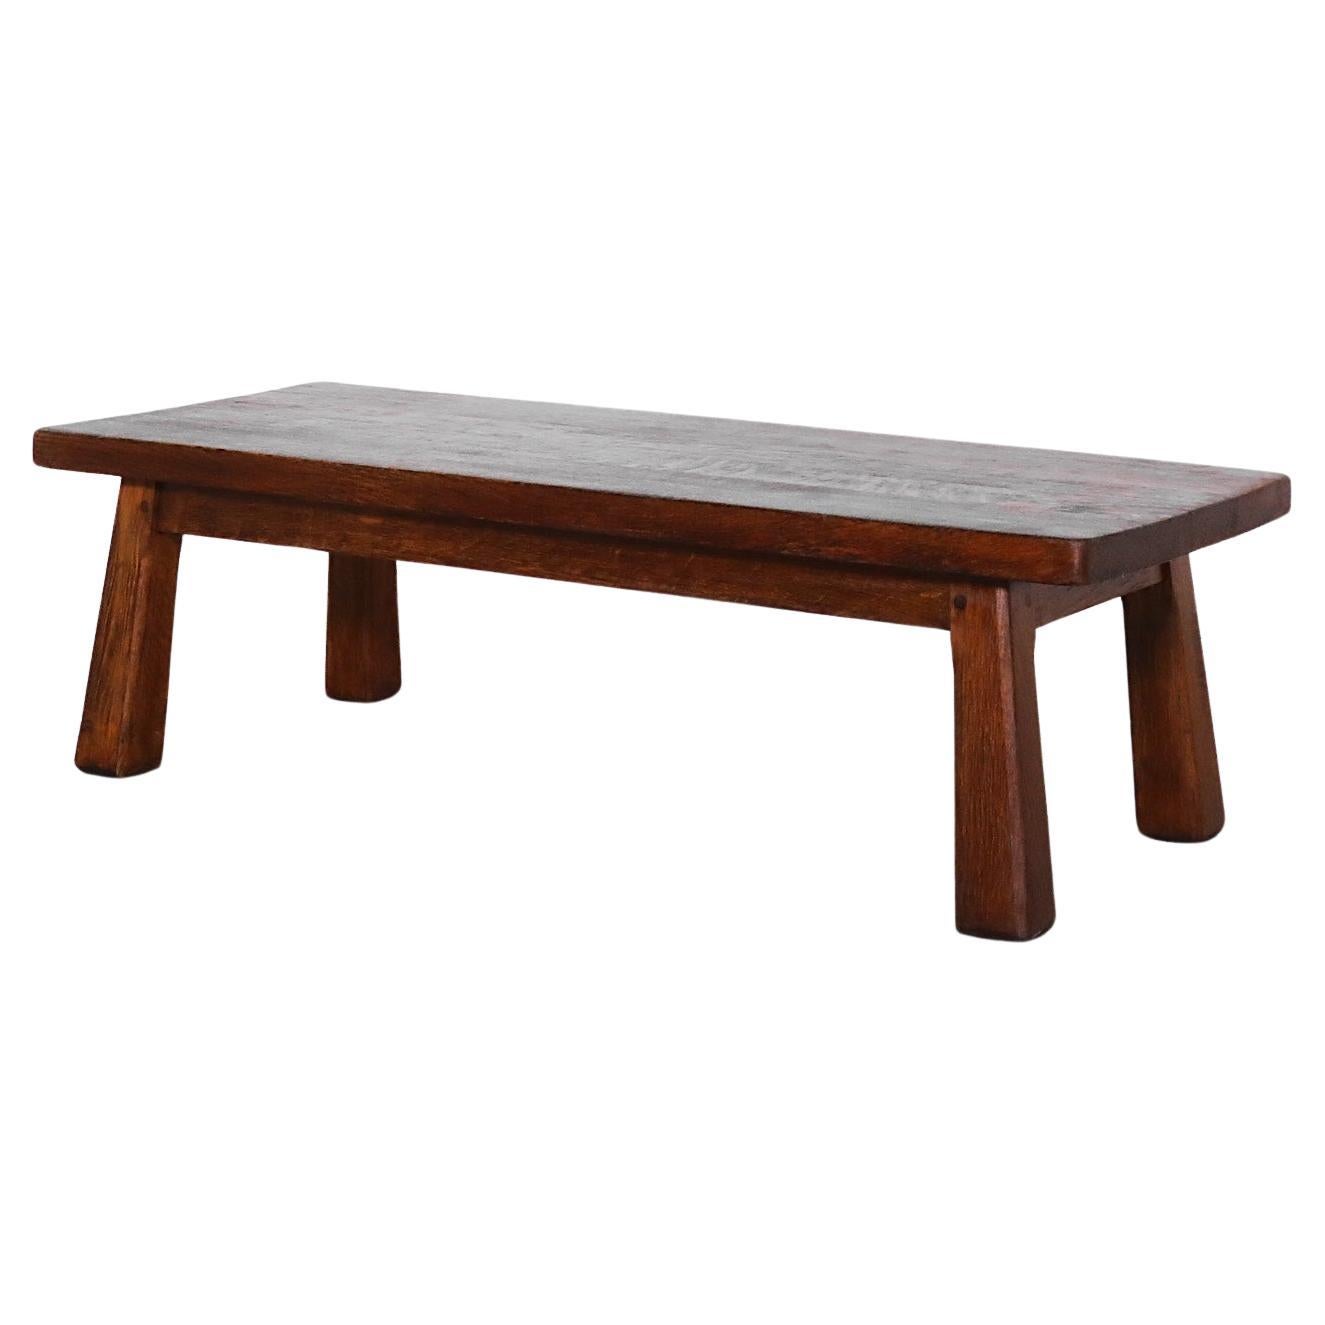 Pierre Chapo Inspired Heavy Oak Table or Bench For Sale